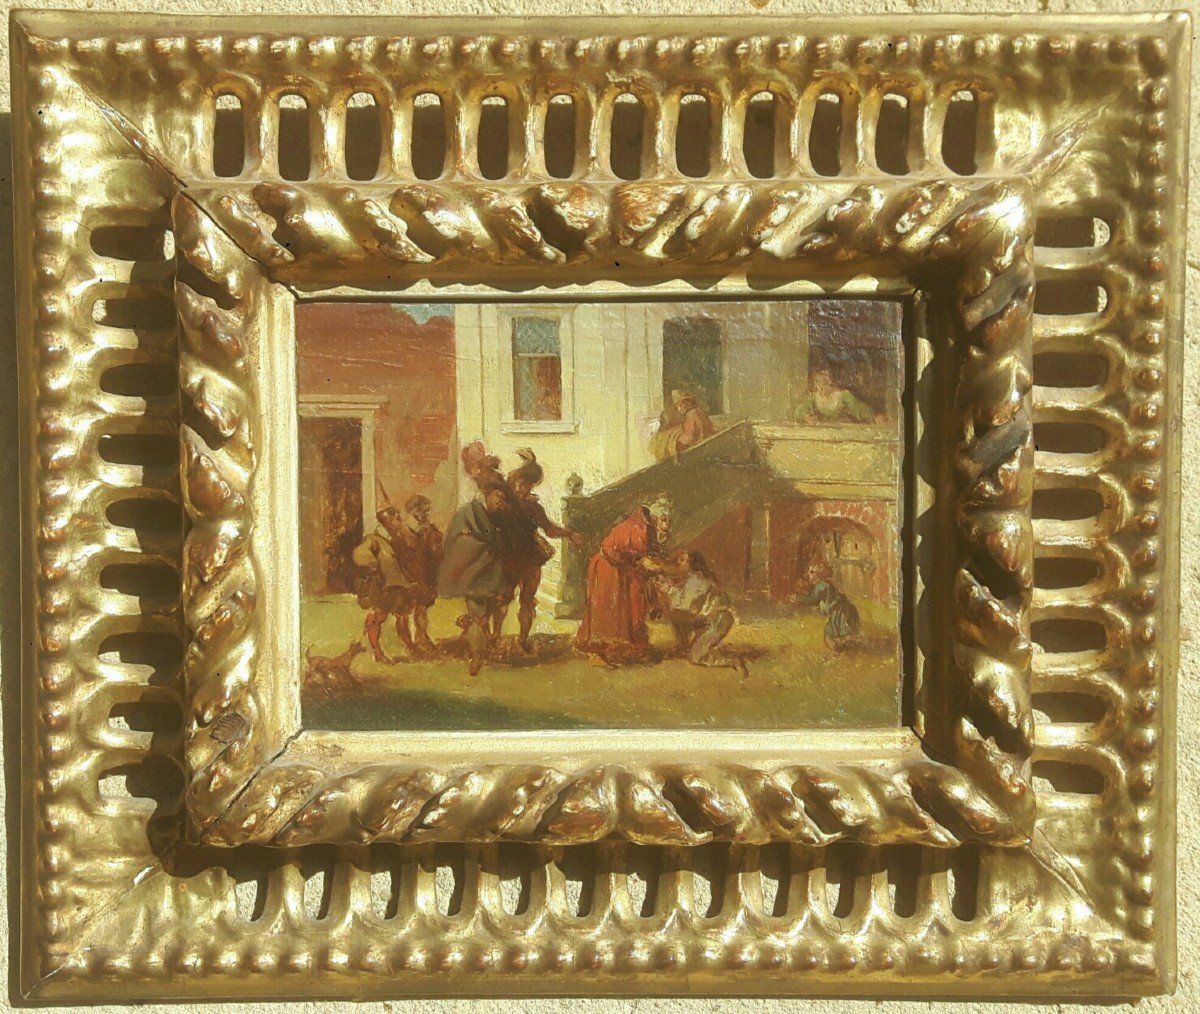 Painting Genre Scene 'the Return Of The Prodigal Son' Early 17th Century